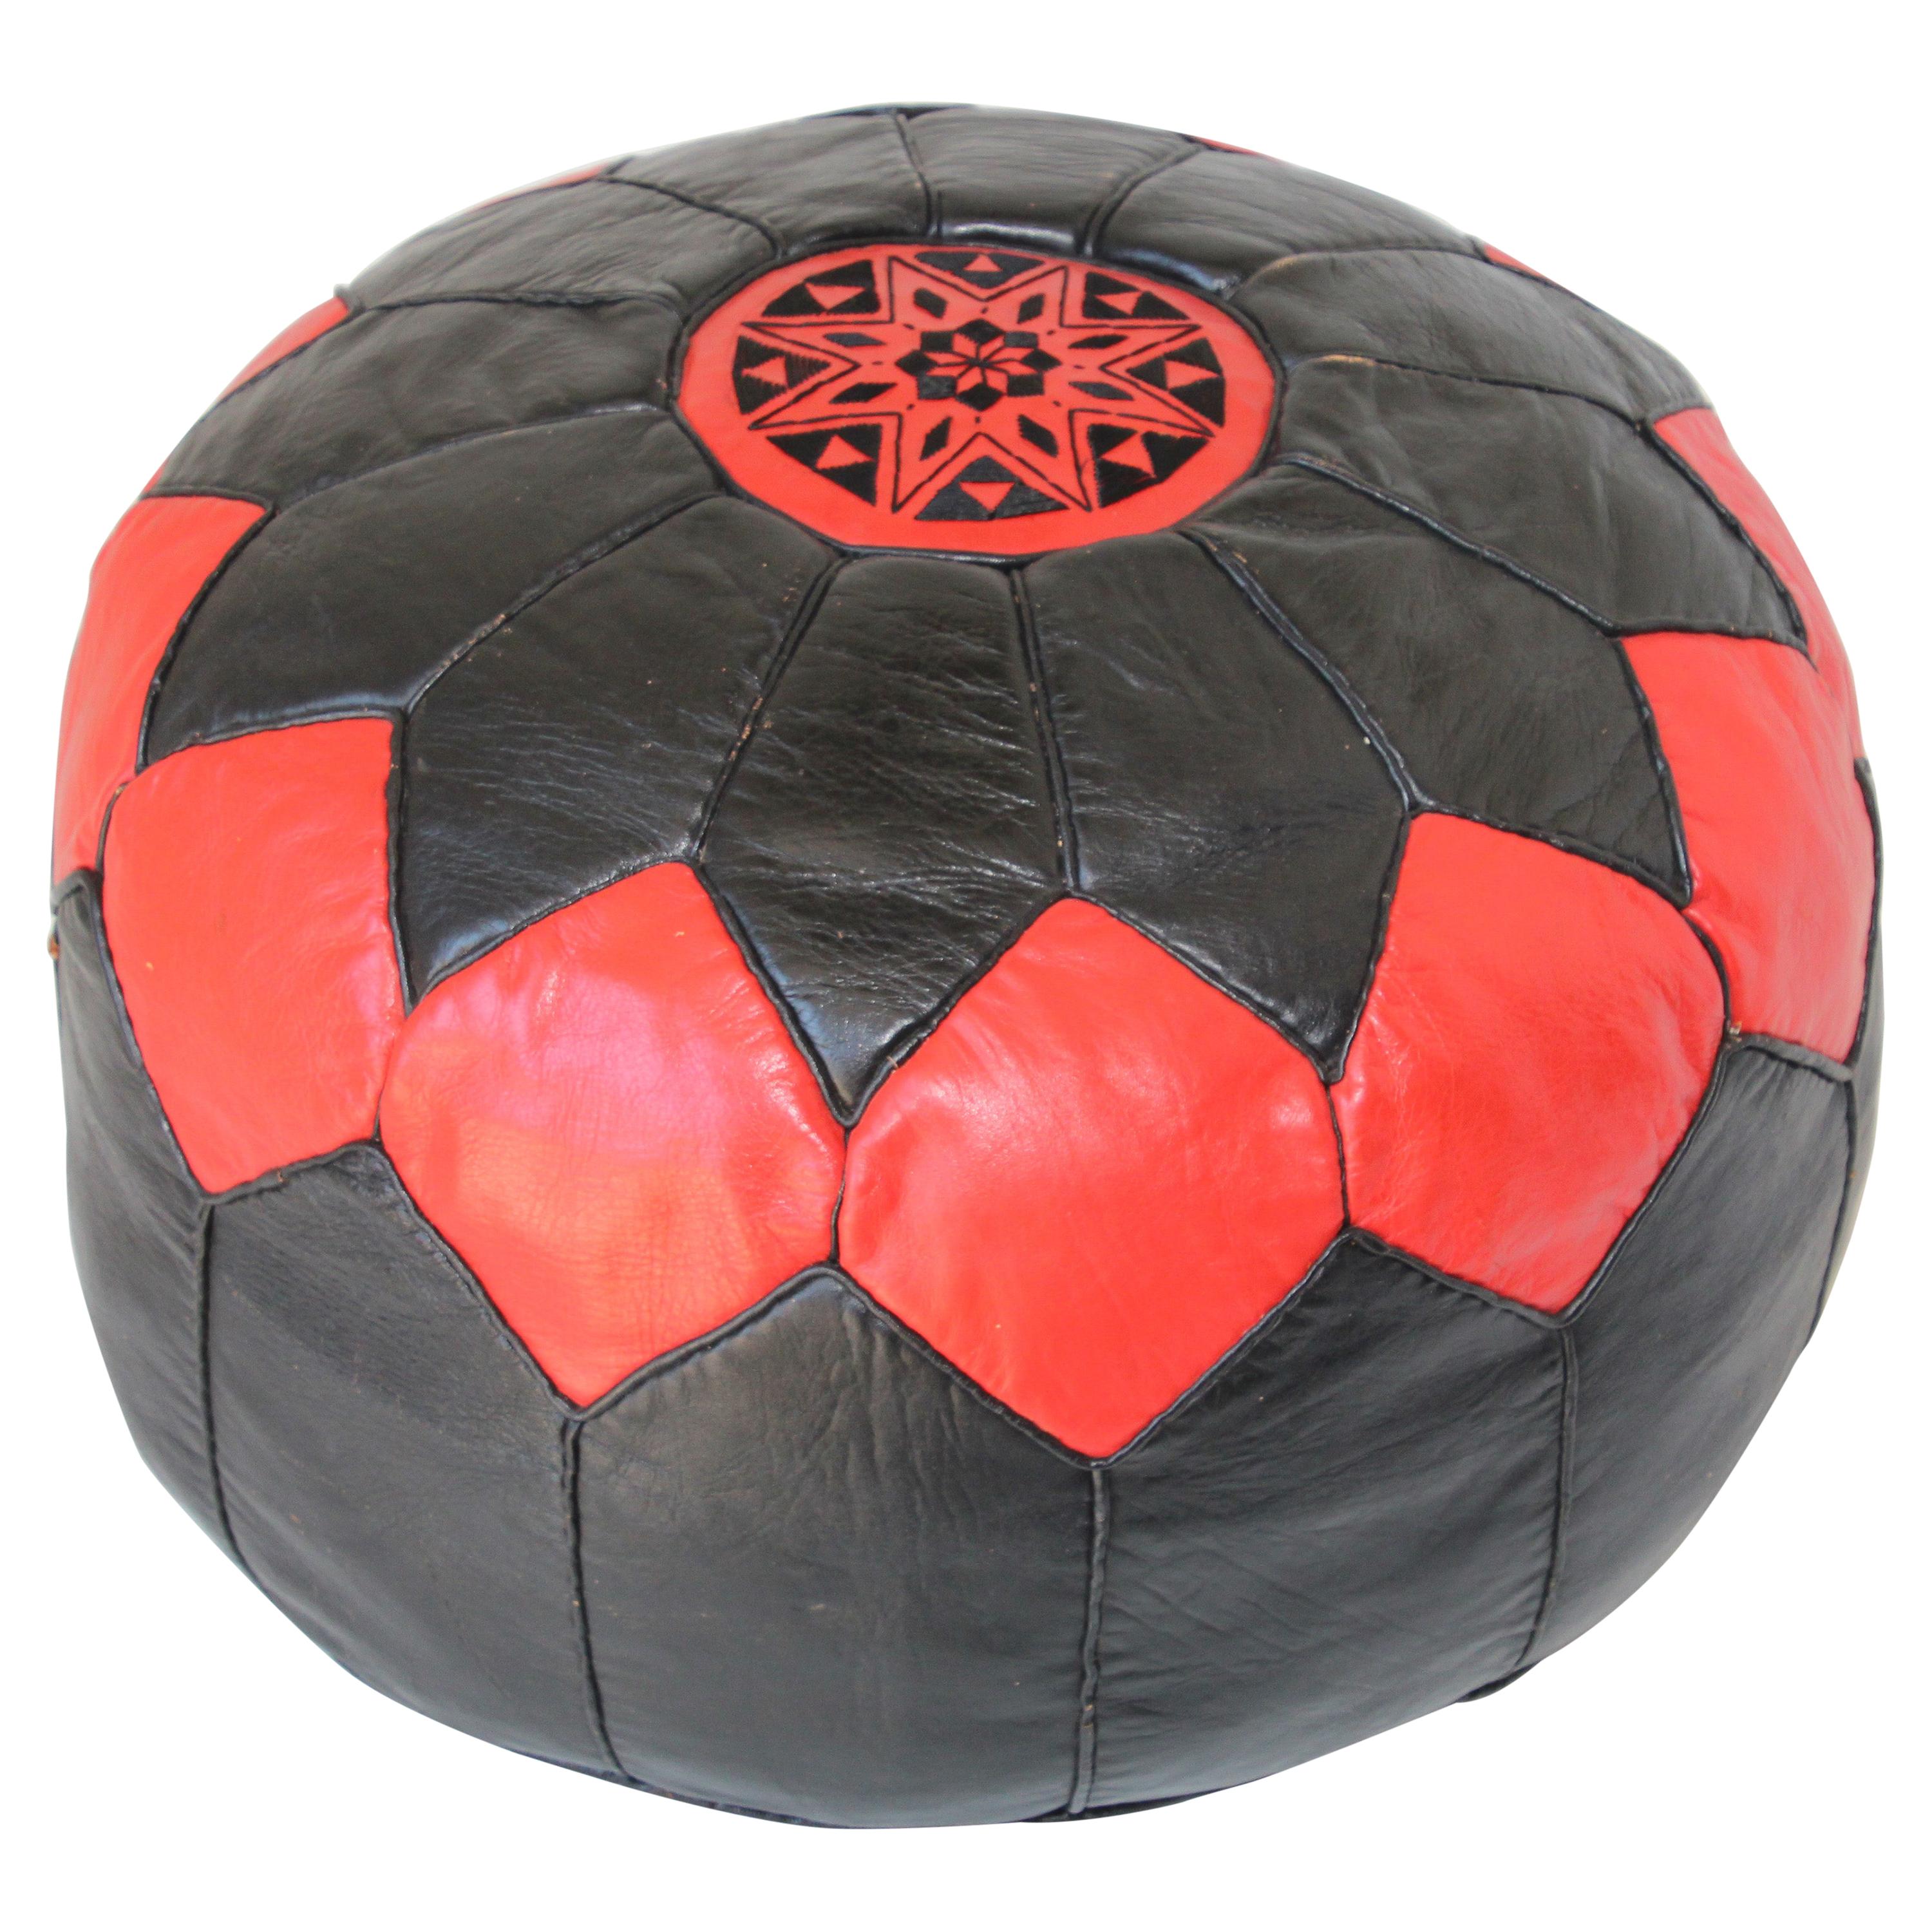 Vintage Moroccan Leather Pouf Hand-Tooled in Marrakesh Red and Black For Sale